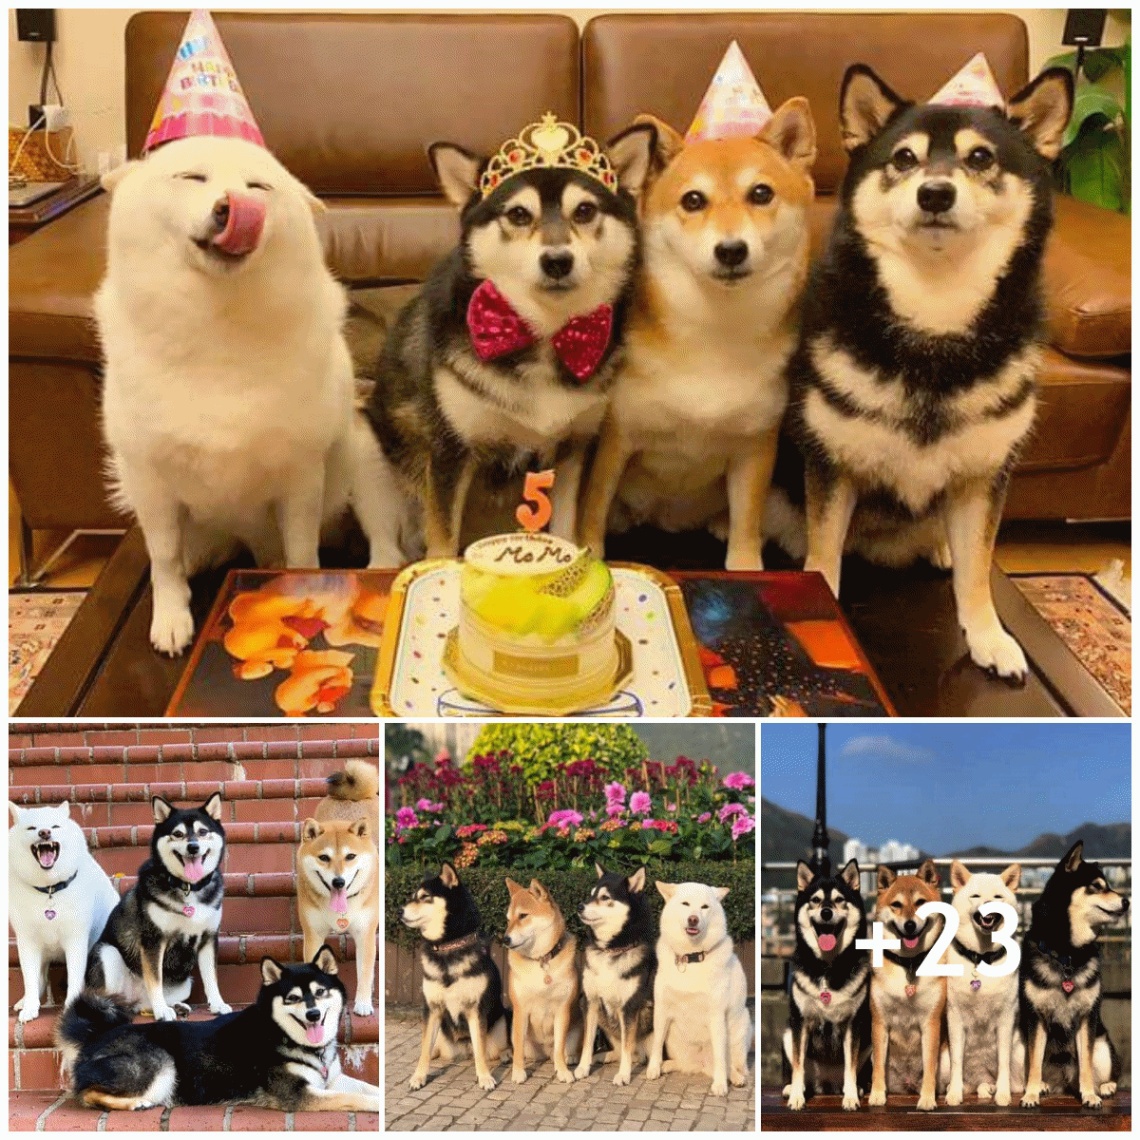 Check out these cute Shiba dogs on their birthdays with hilarious facial expressions that have the internet community in stitches.